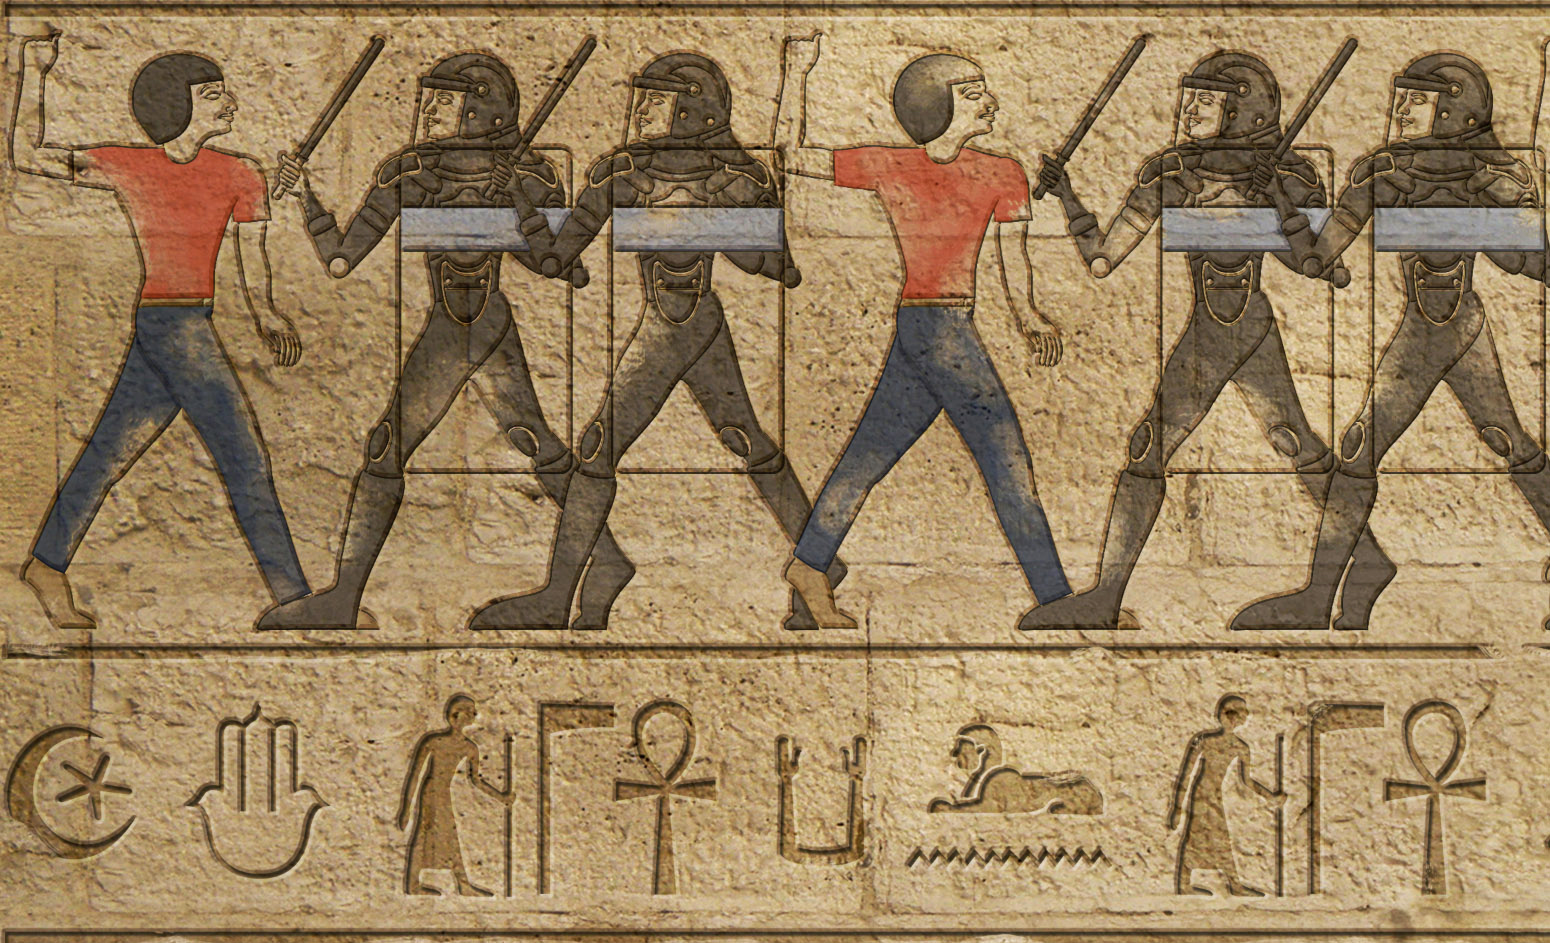 If Hieroglyphics Represented the Middle East Today